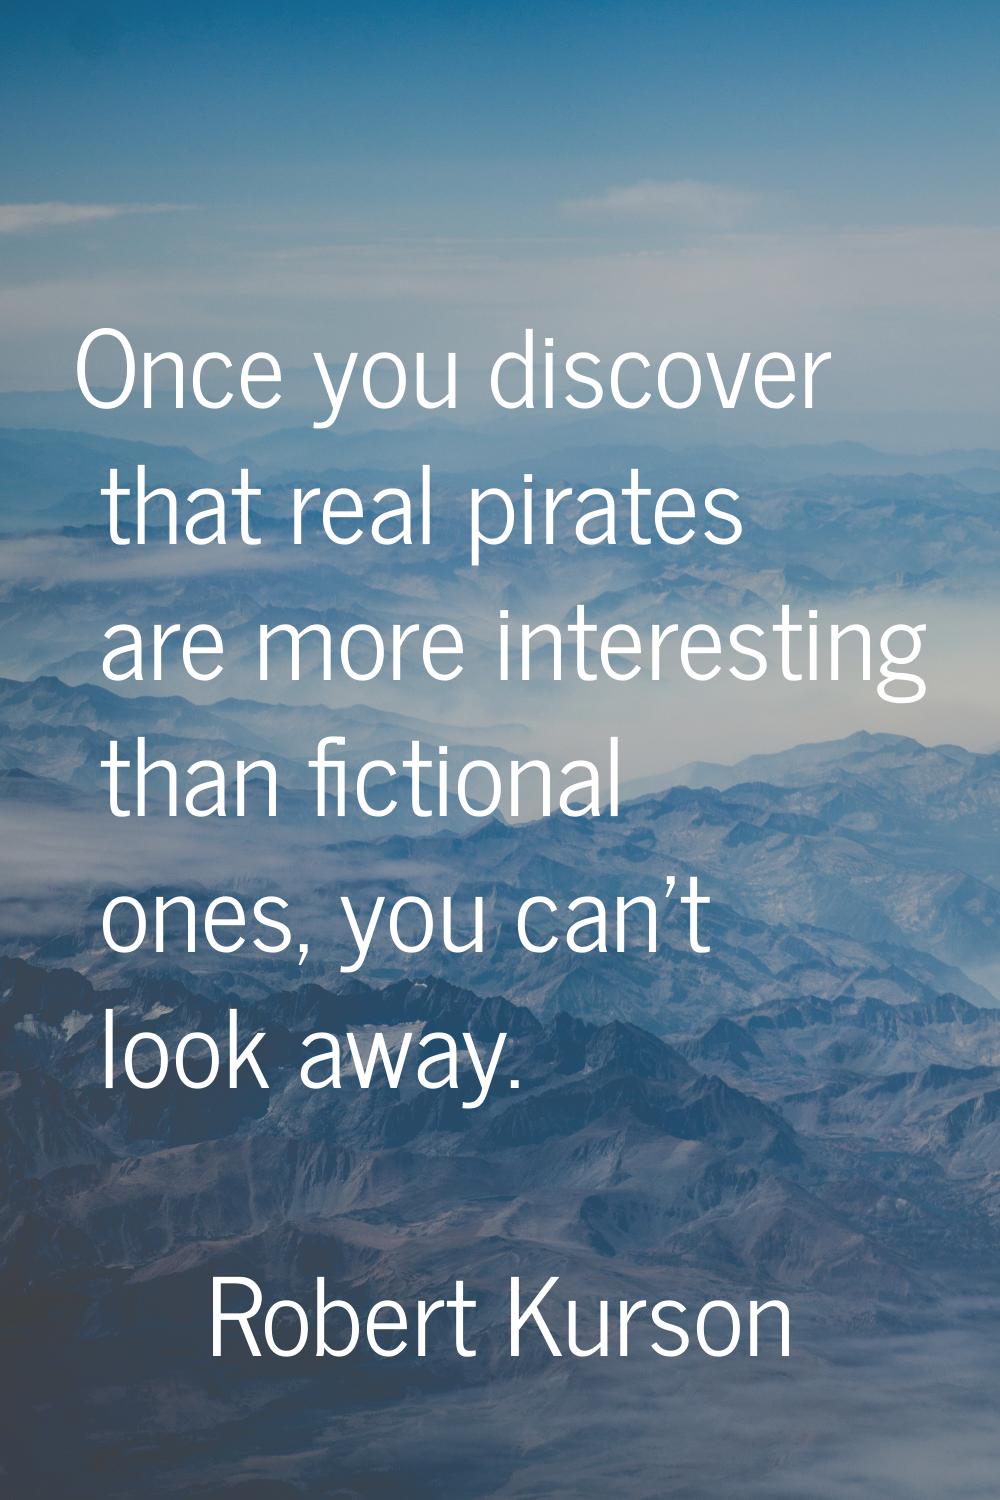 Once you discover that real pirates are more interesting than fictional ones, you can't look away.